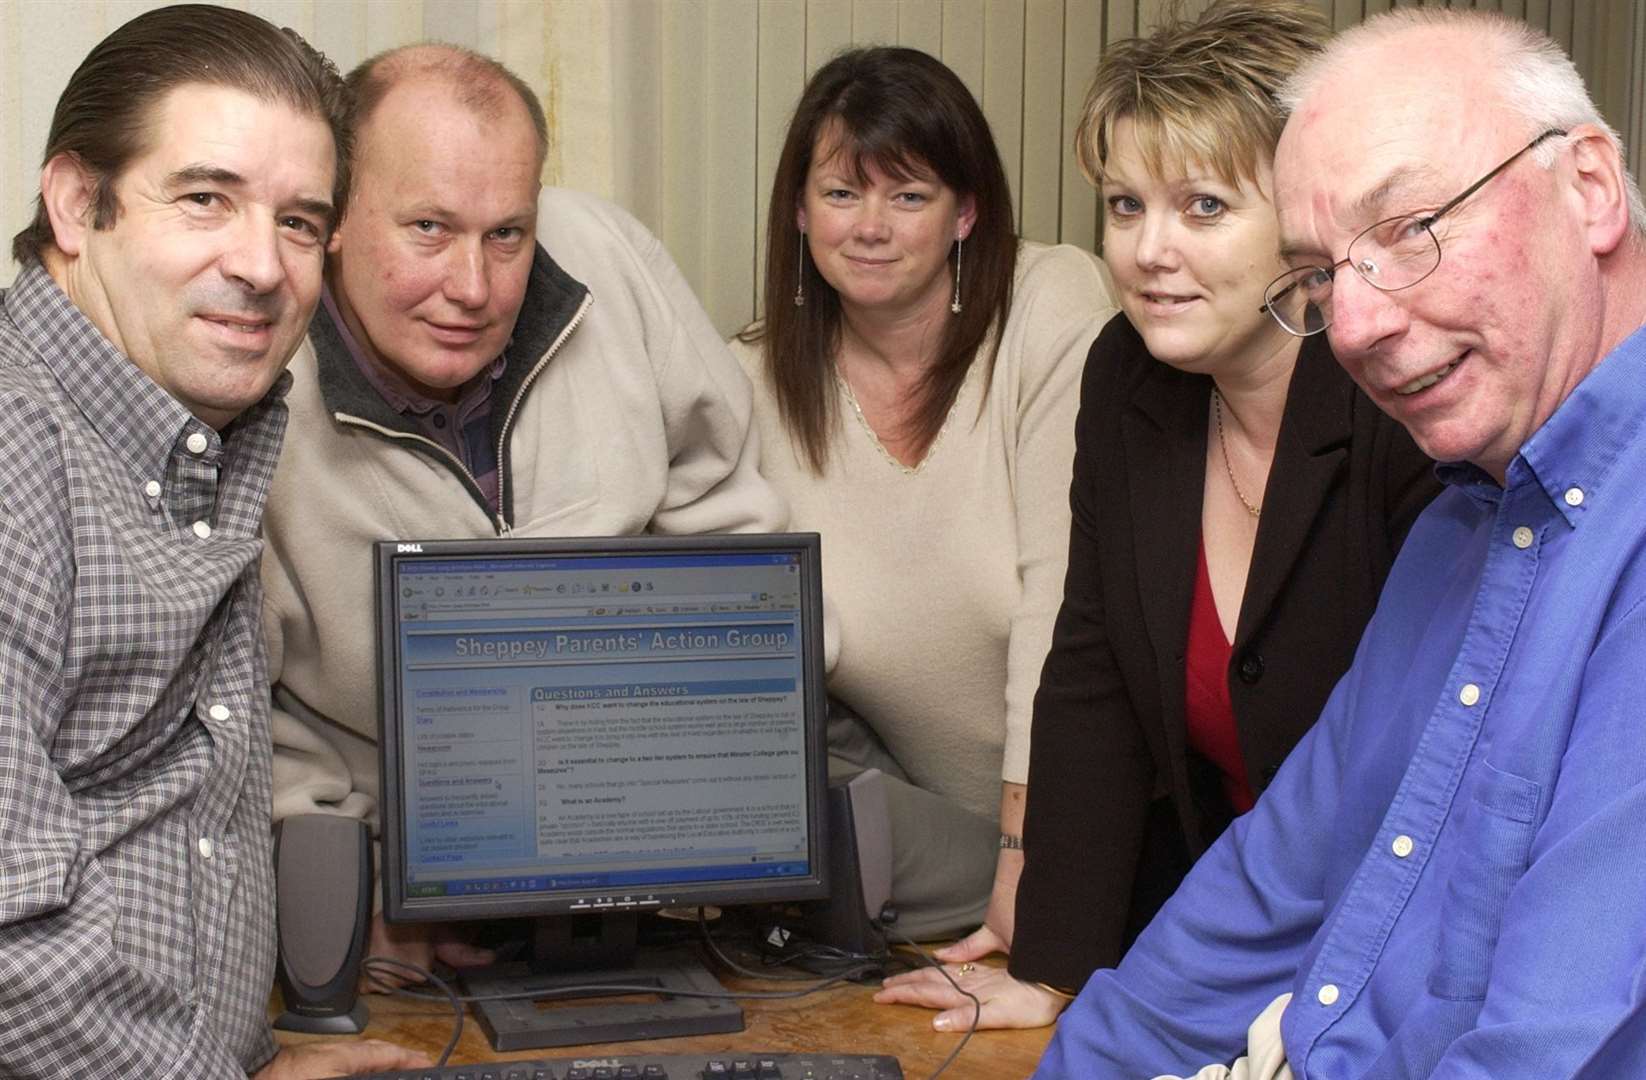 Launch of the SPAG website at Tony Batchelor's house in Halfway in 2004. Picture shows, from the left, Dave Butler (Minster Primary), Kevin Hofman (Danley and Halfway), Mary Wood (St George's), Chris Botting and Tony Batchelor (Danley and Minster College). Picture by Andy Payton